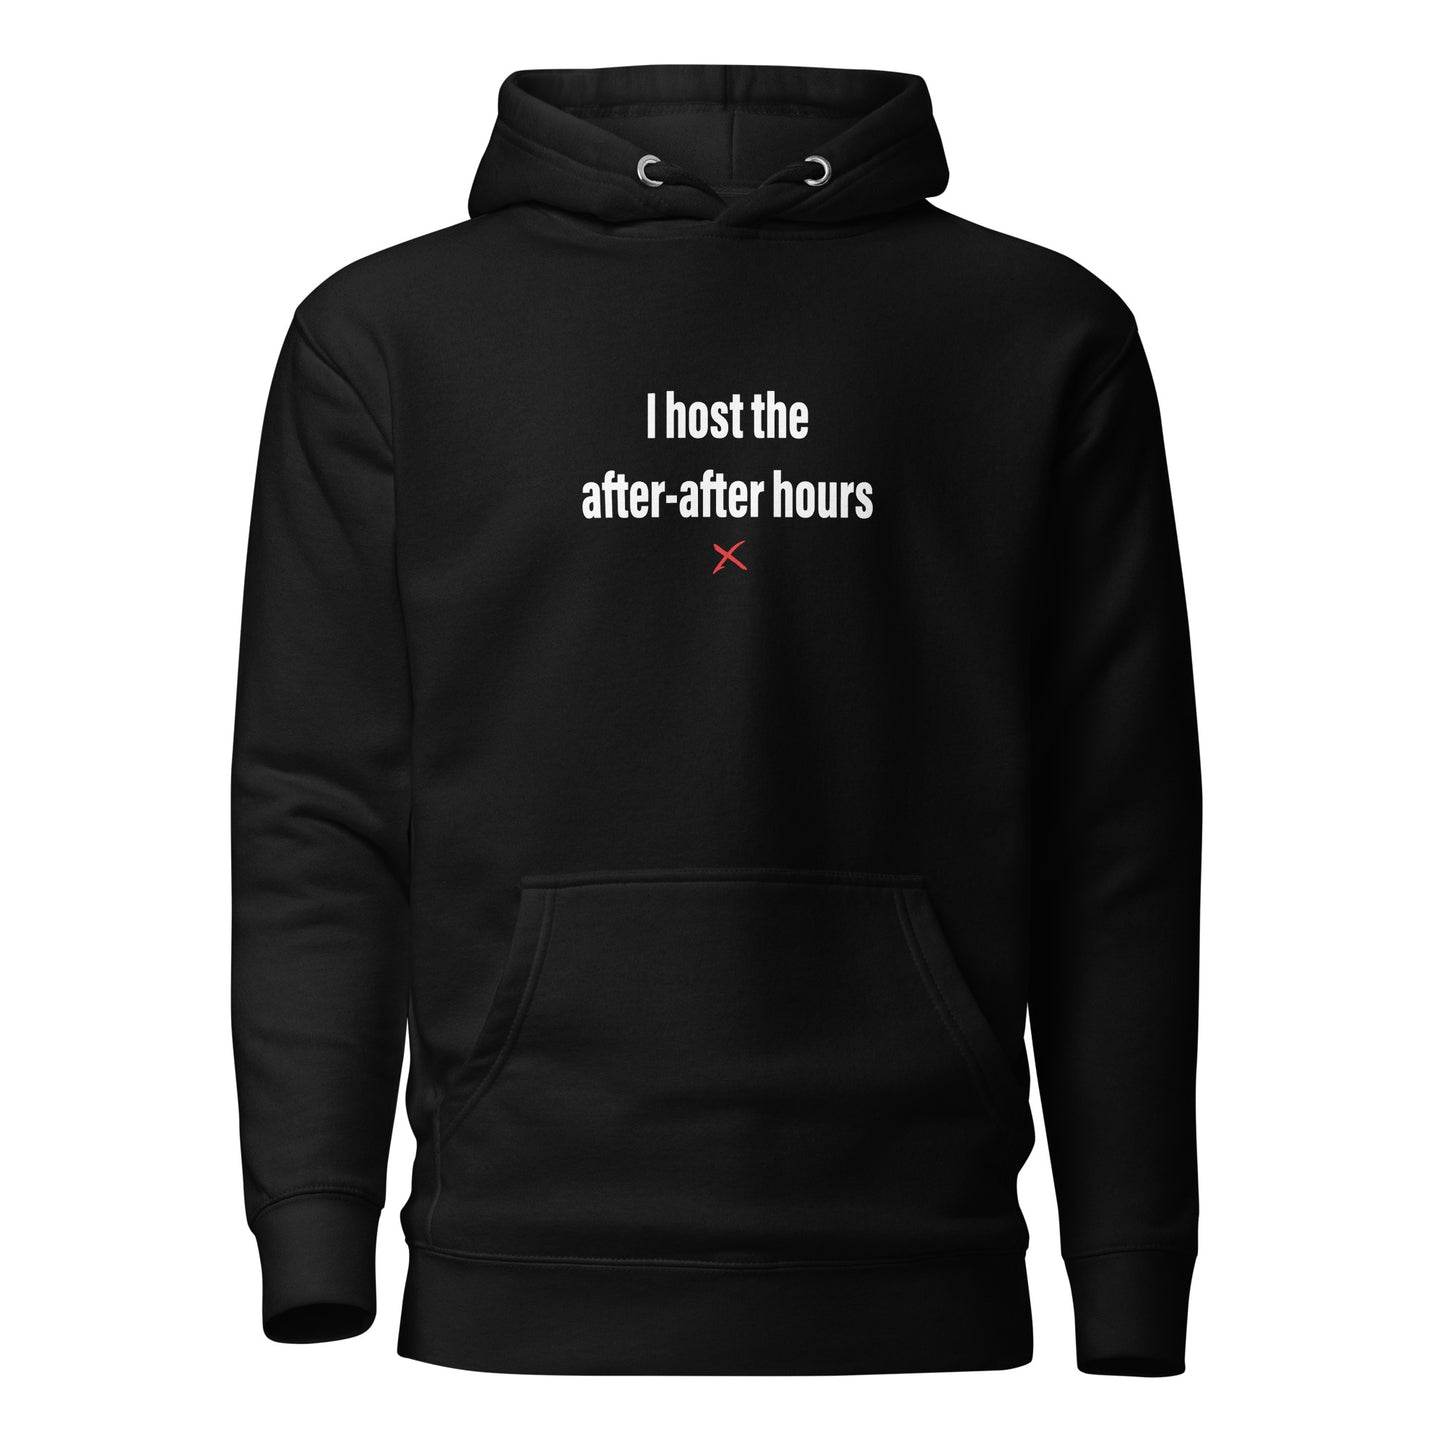 I host the after-after hours - Hoodie